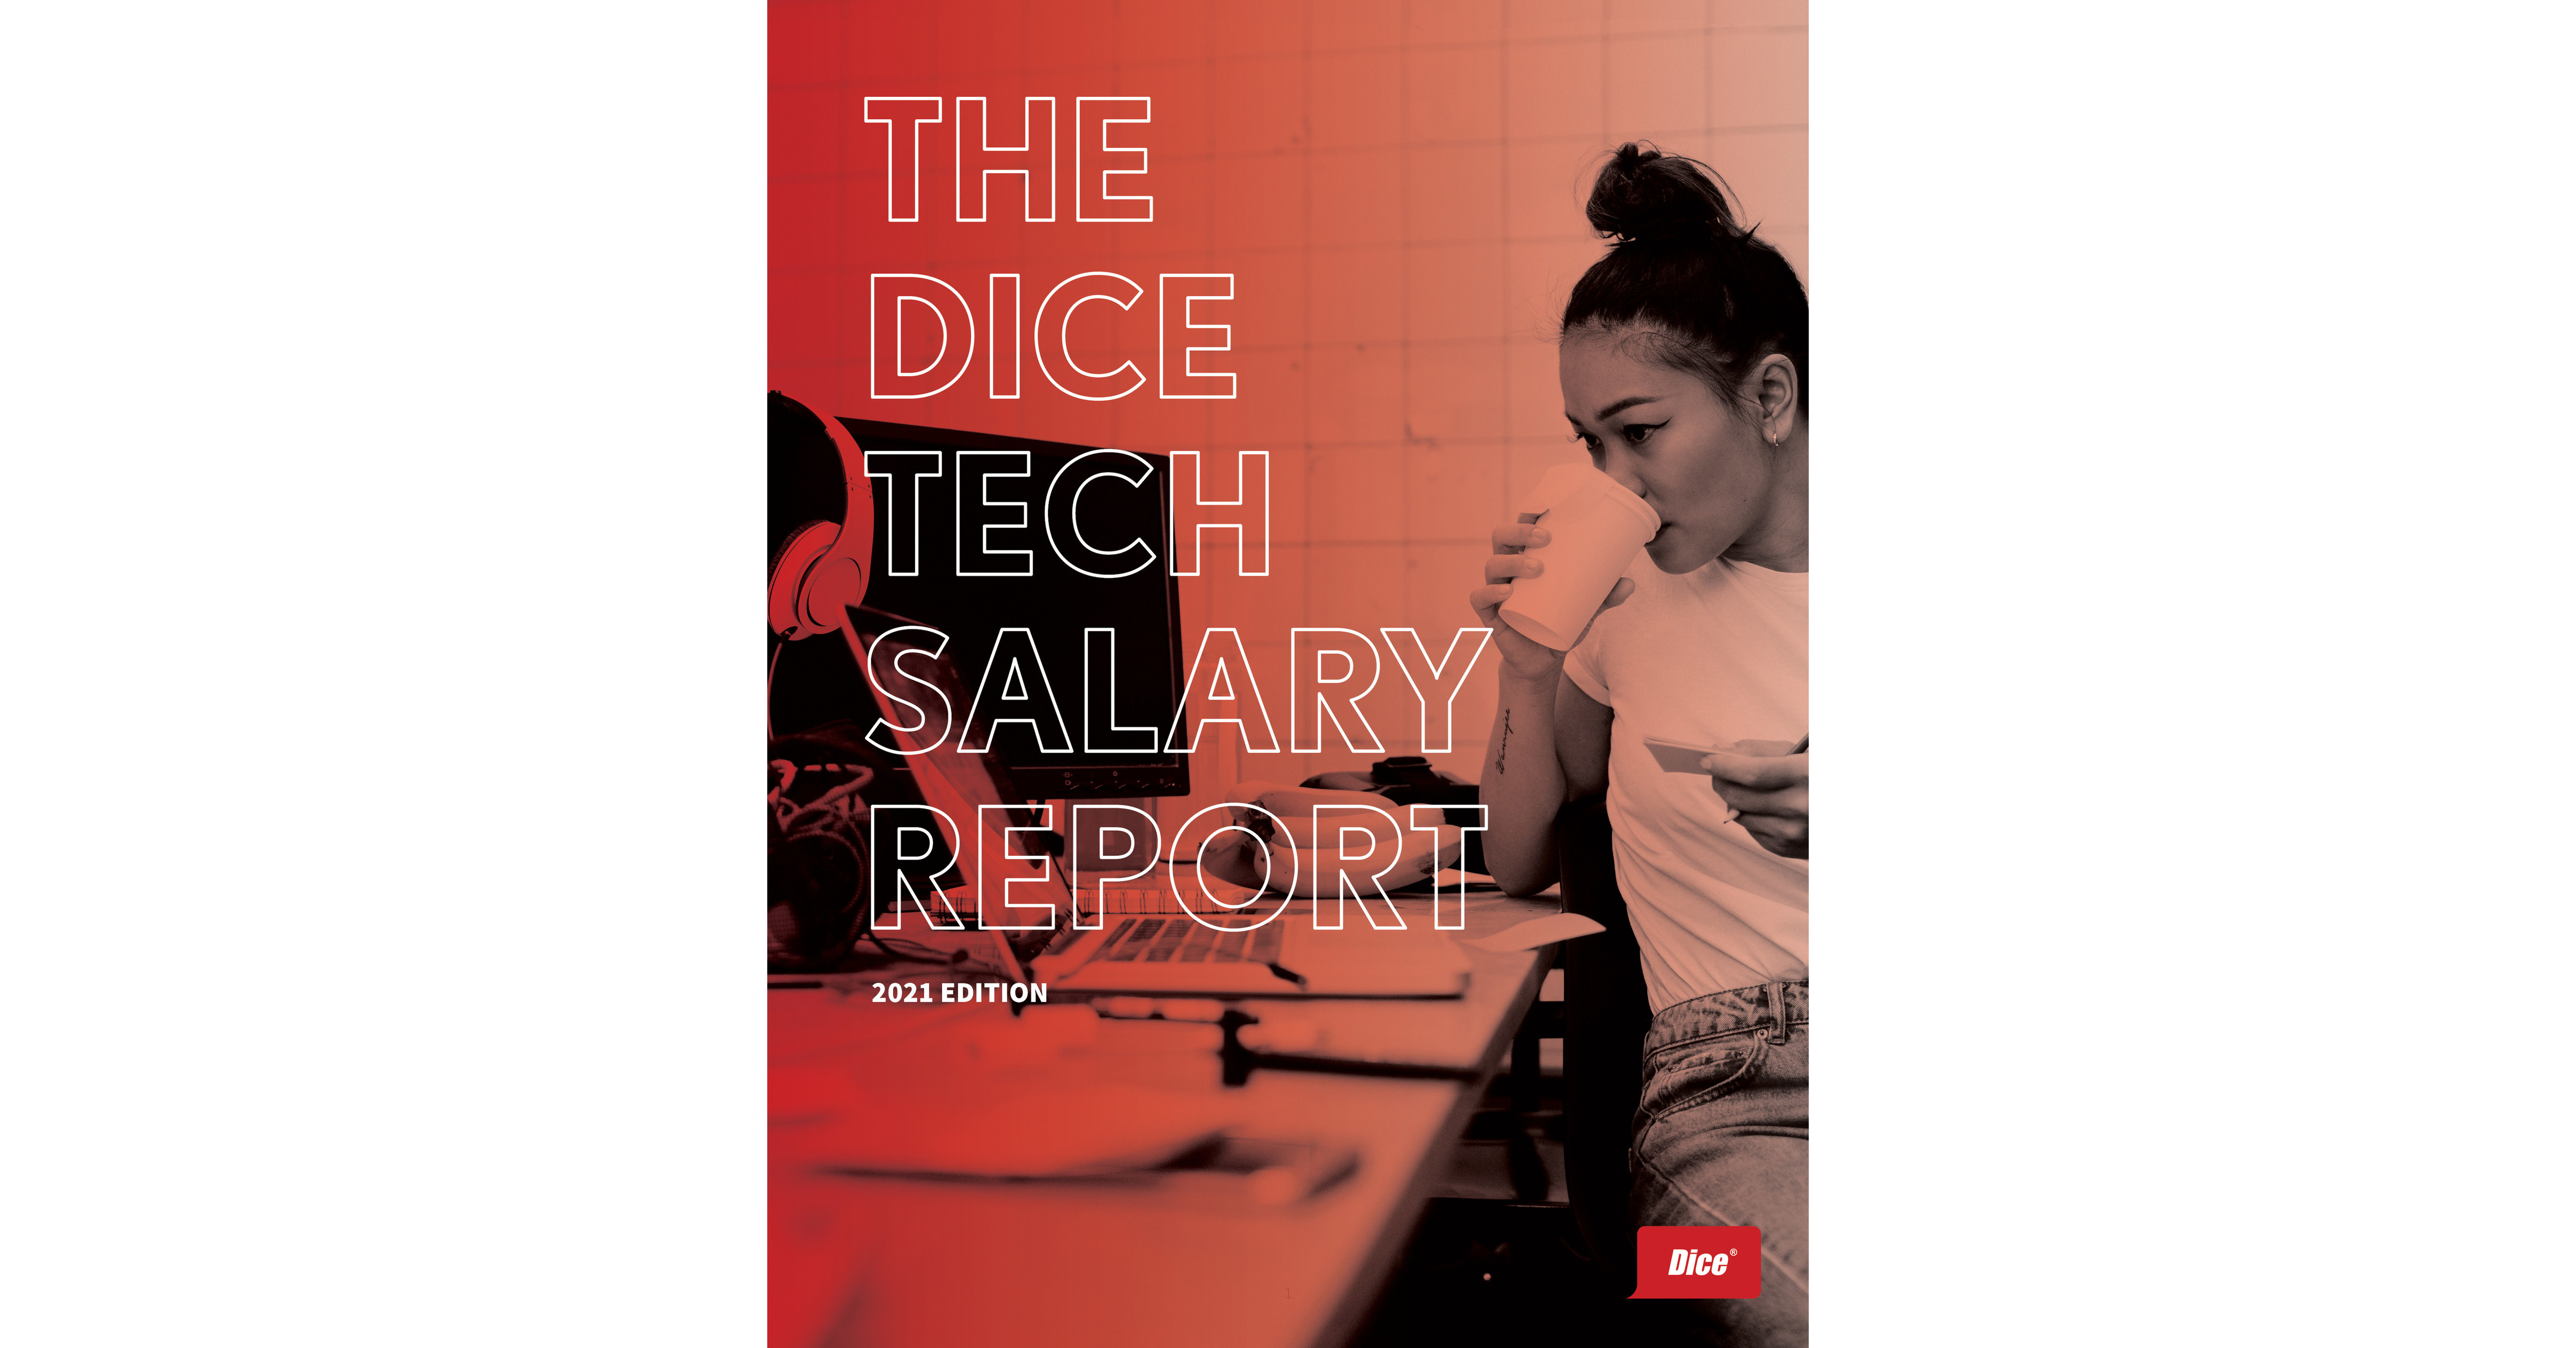 Technologist Salaries Rose 3.6 in 2020 Dice Releases Tech Salary Report